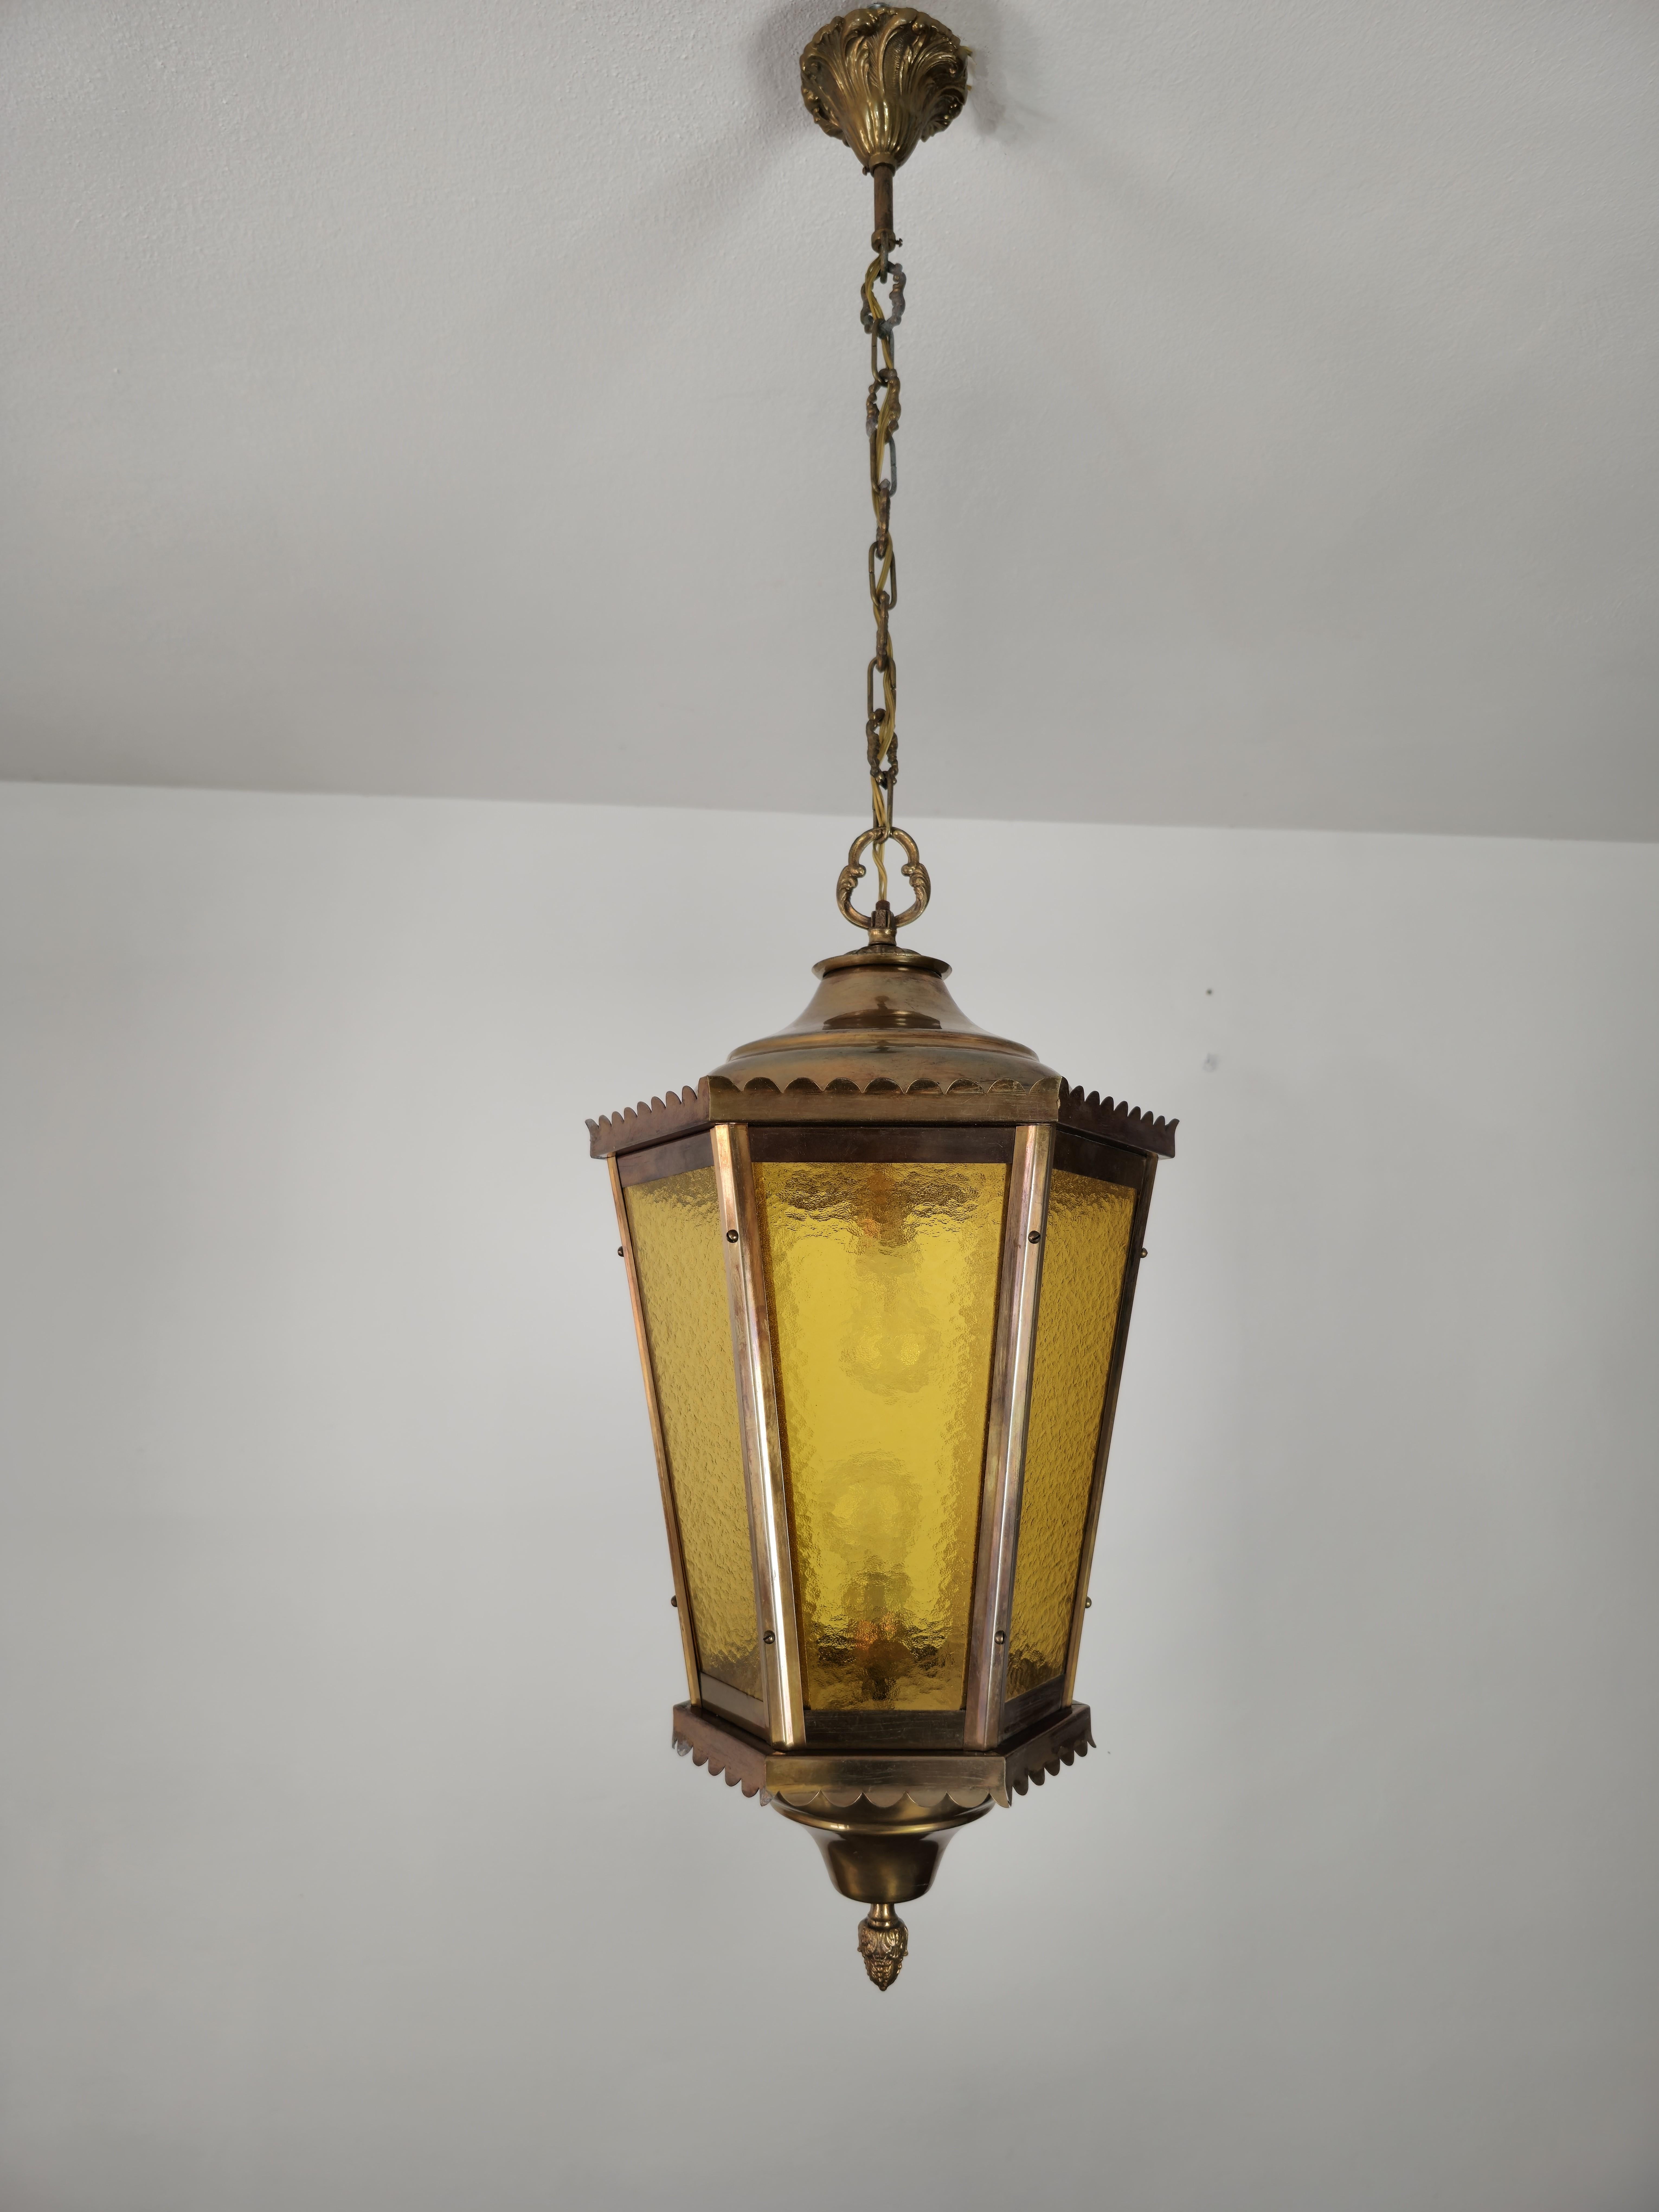  Pendant Lantern Suspension Lamp Brass Glass Cathedral Midcentury Italy 1940s In Good Condition For Sale In Palermo, IT